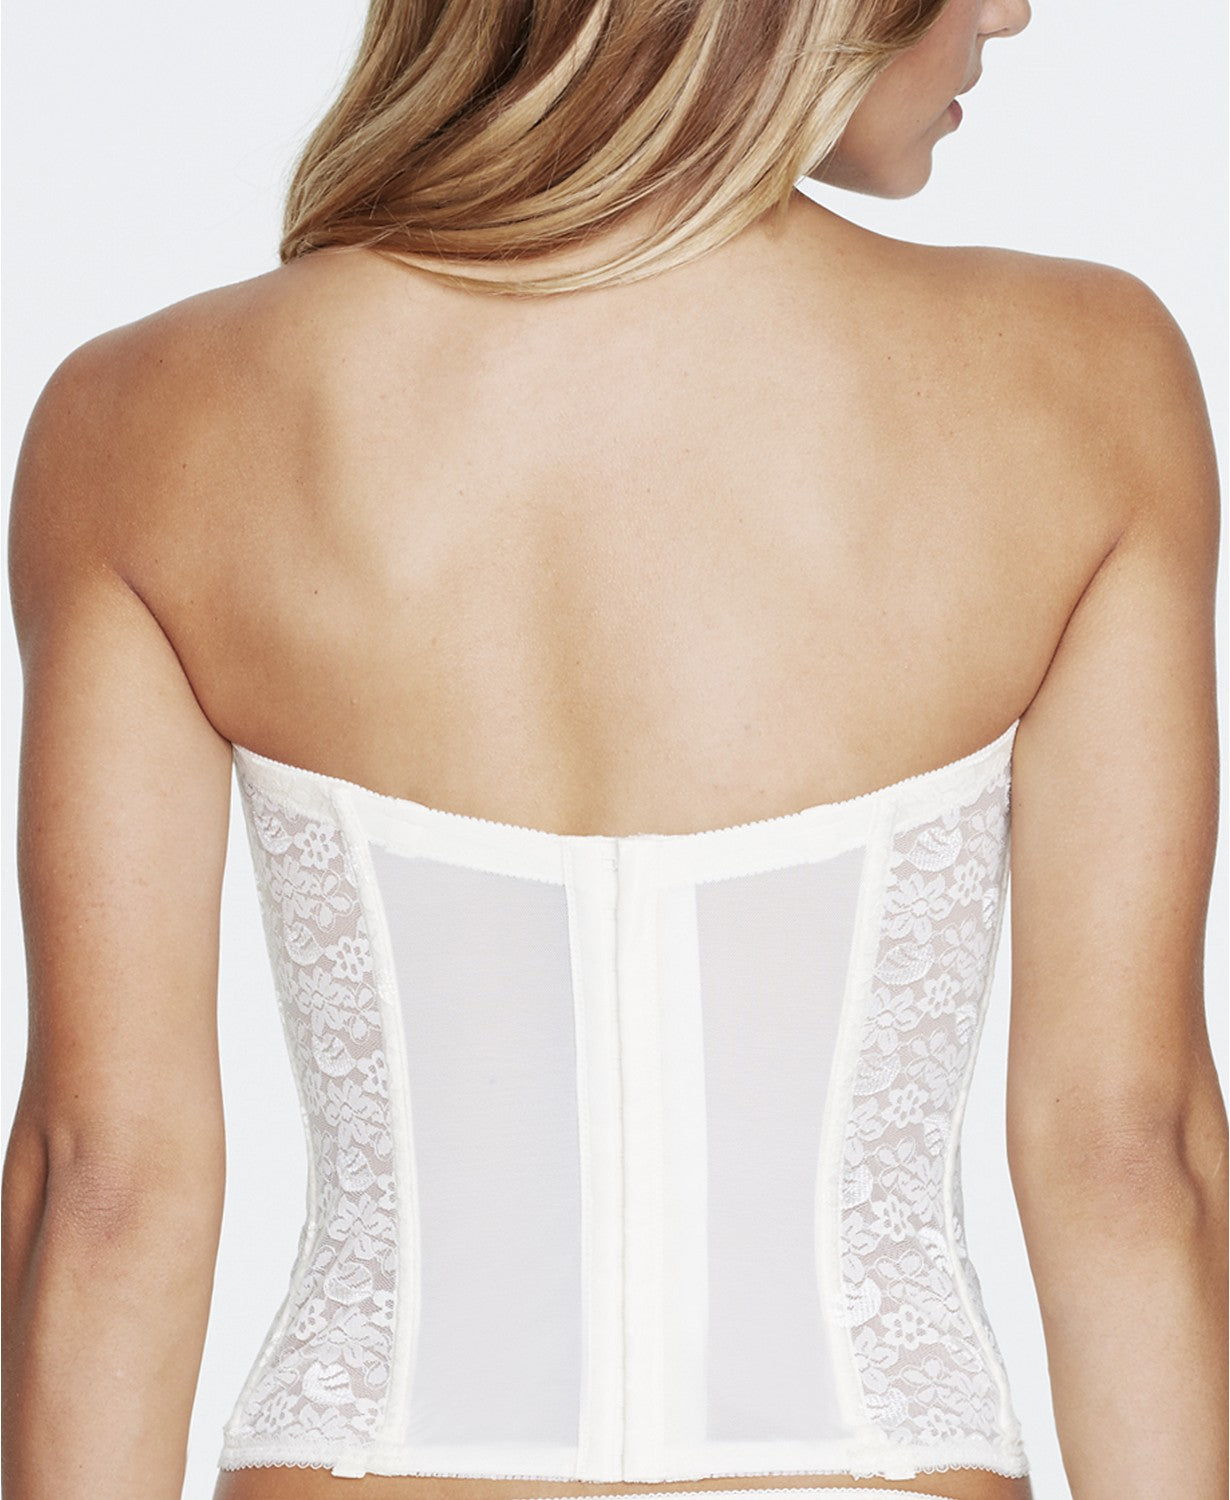 Backless Corset Wedding, Corsets Bustiers Thong